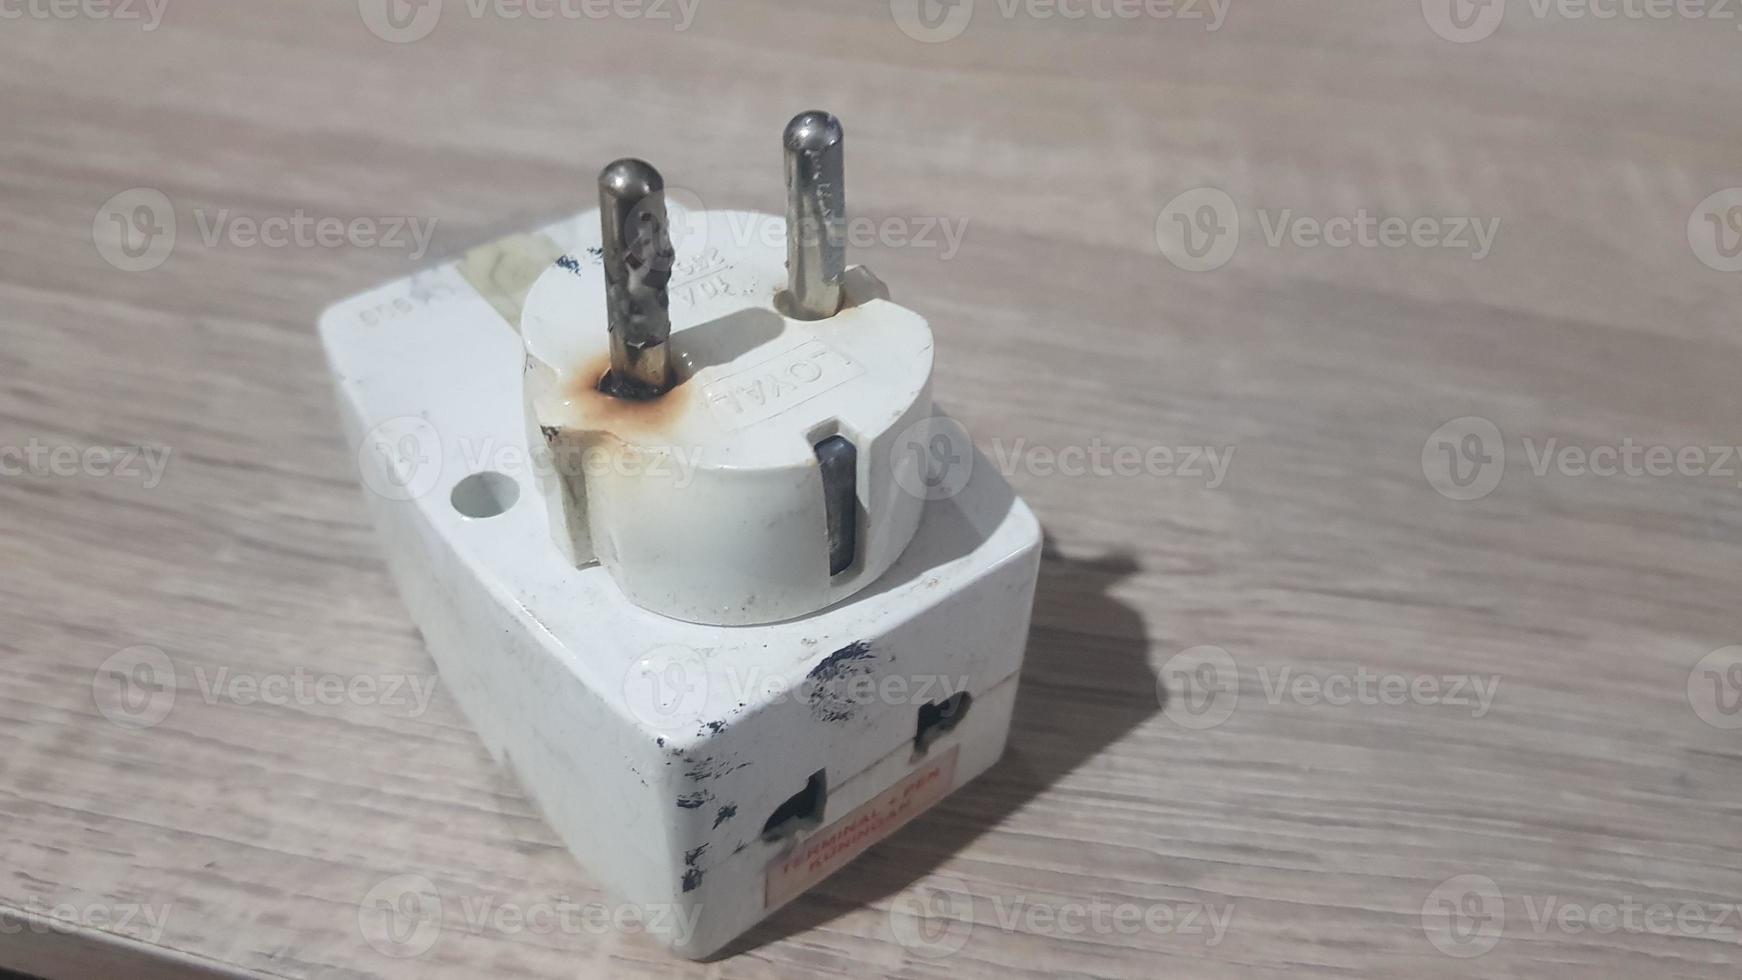 Burnout electrical appliances or electrical plug or electrical adapter dangerous photo